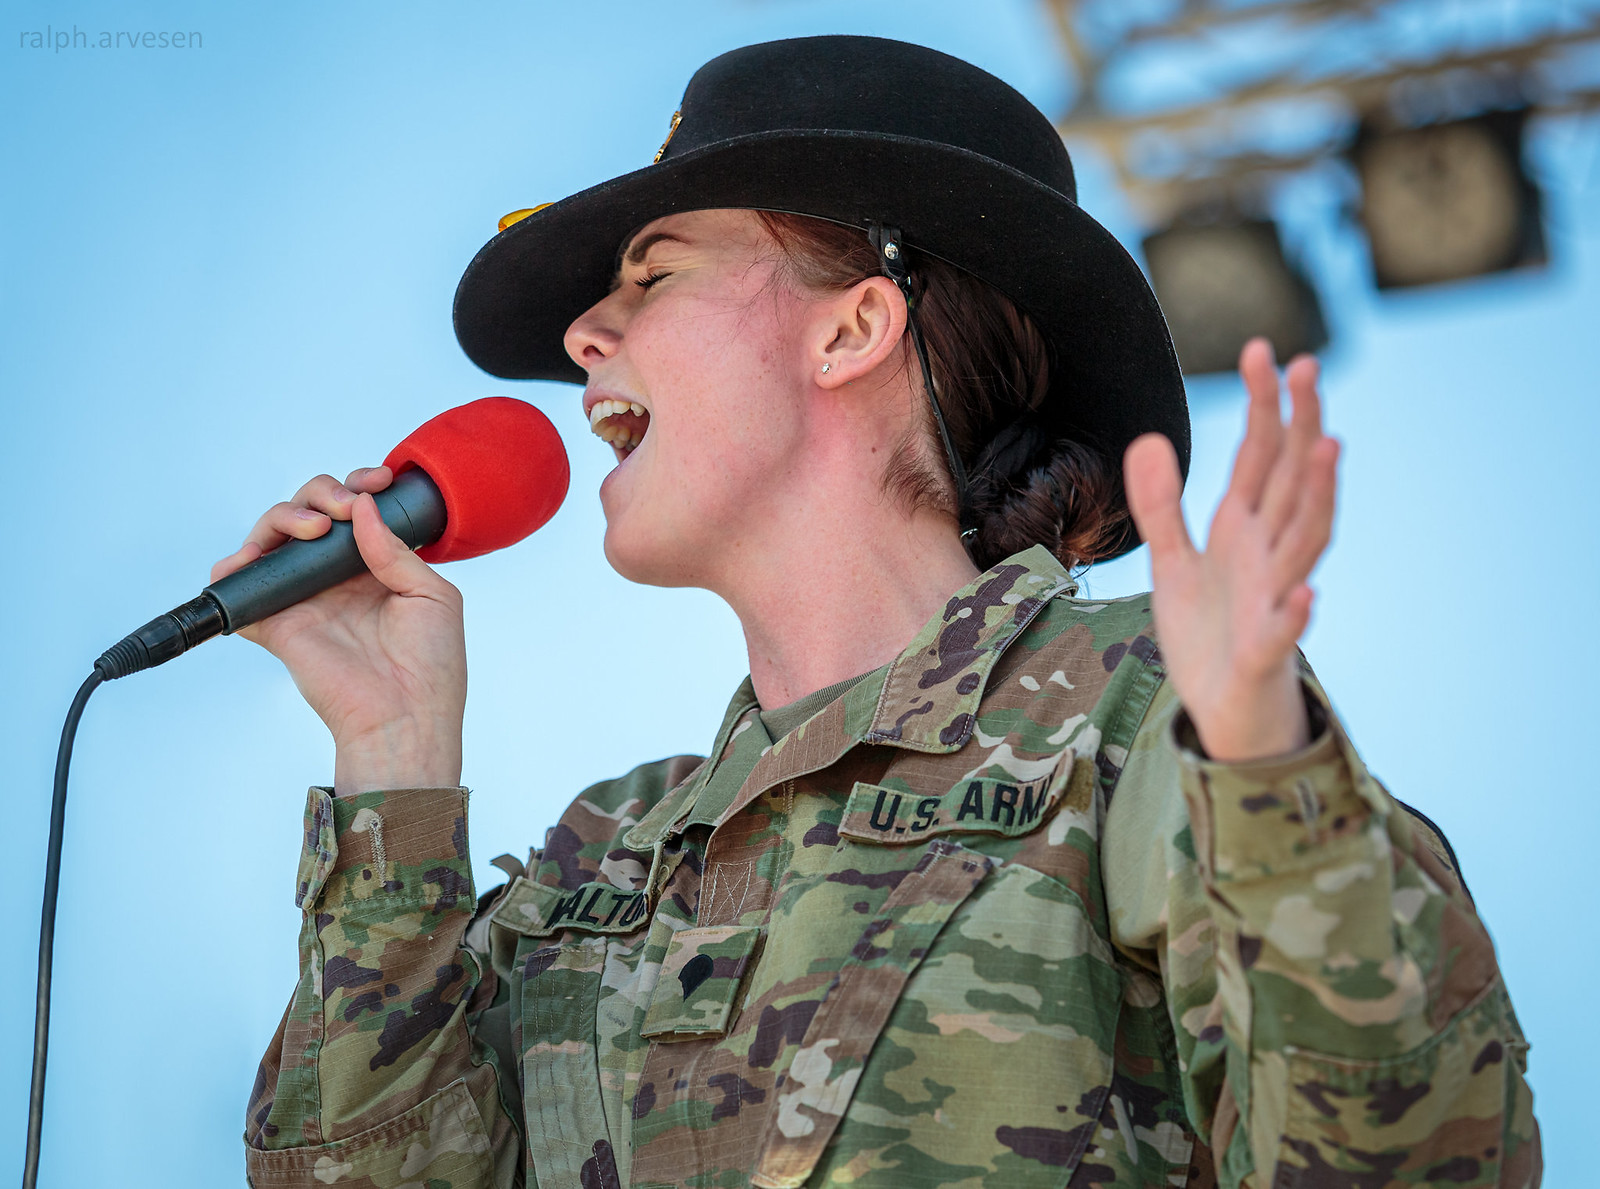 1st Cavalry Division Rock Band | Texas Review | Ralph Arvesen